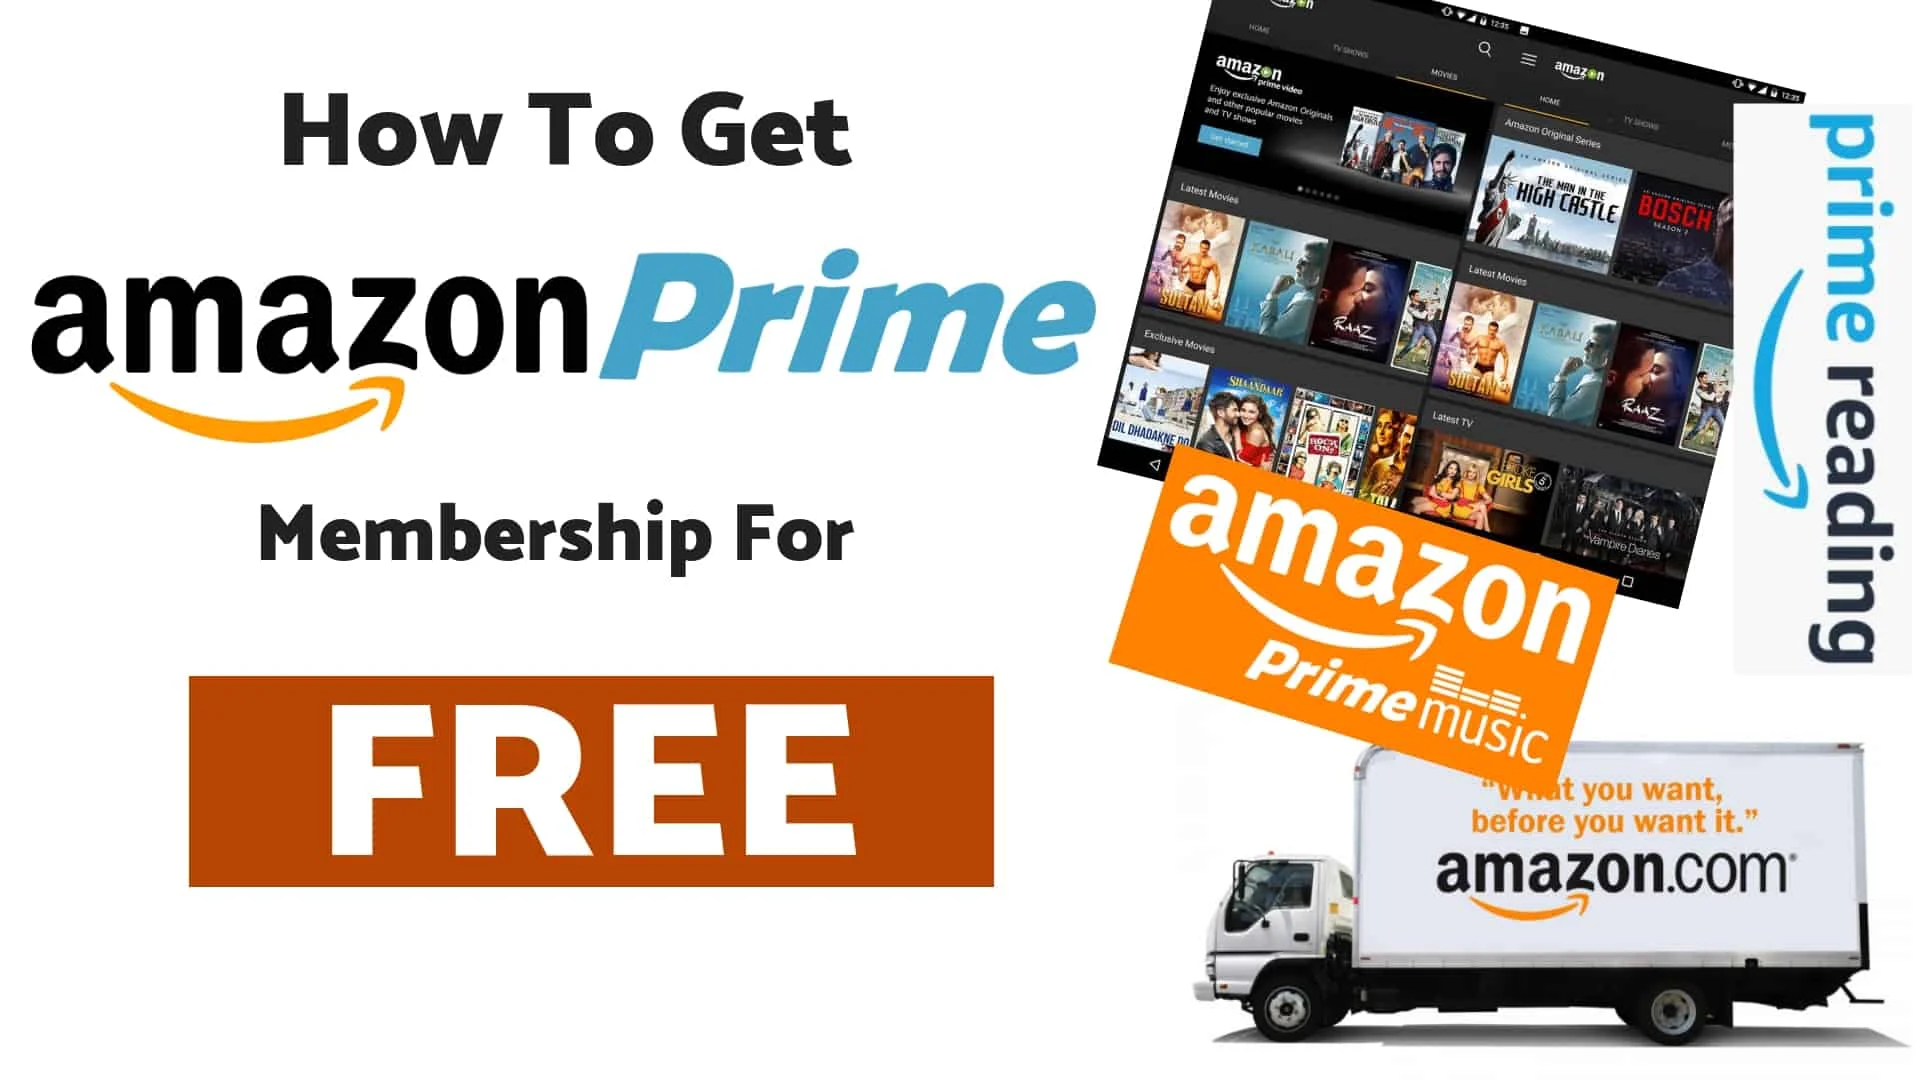 3 Easy Ways to Get Free Amazon Prime Membership For One Year